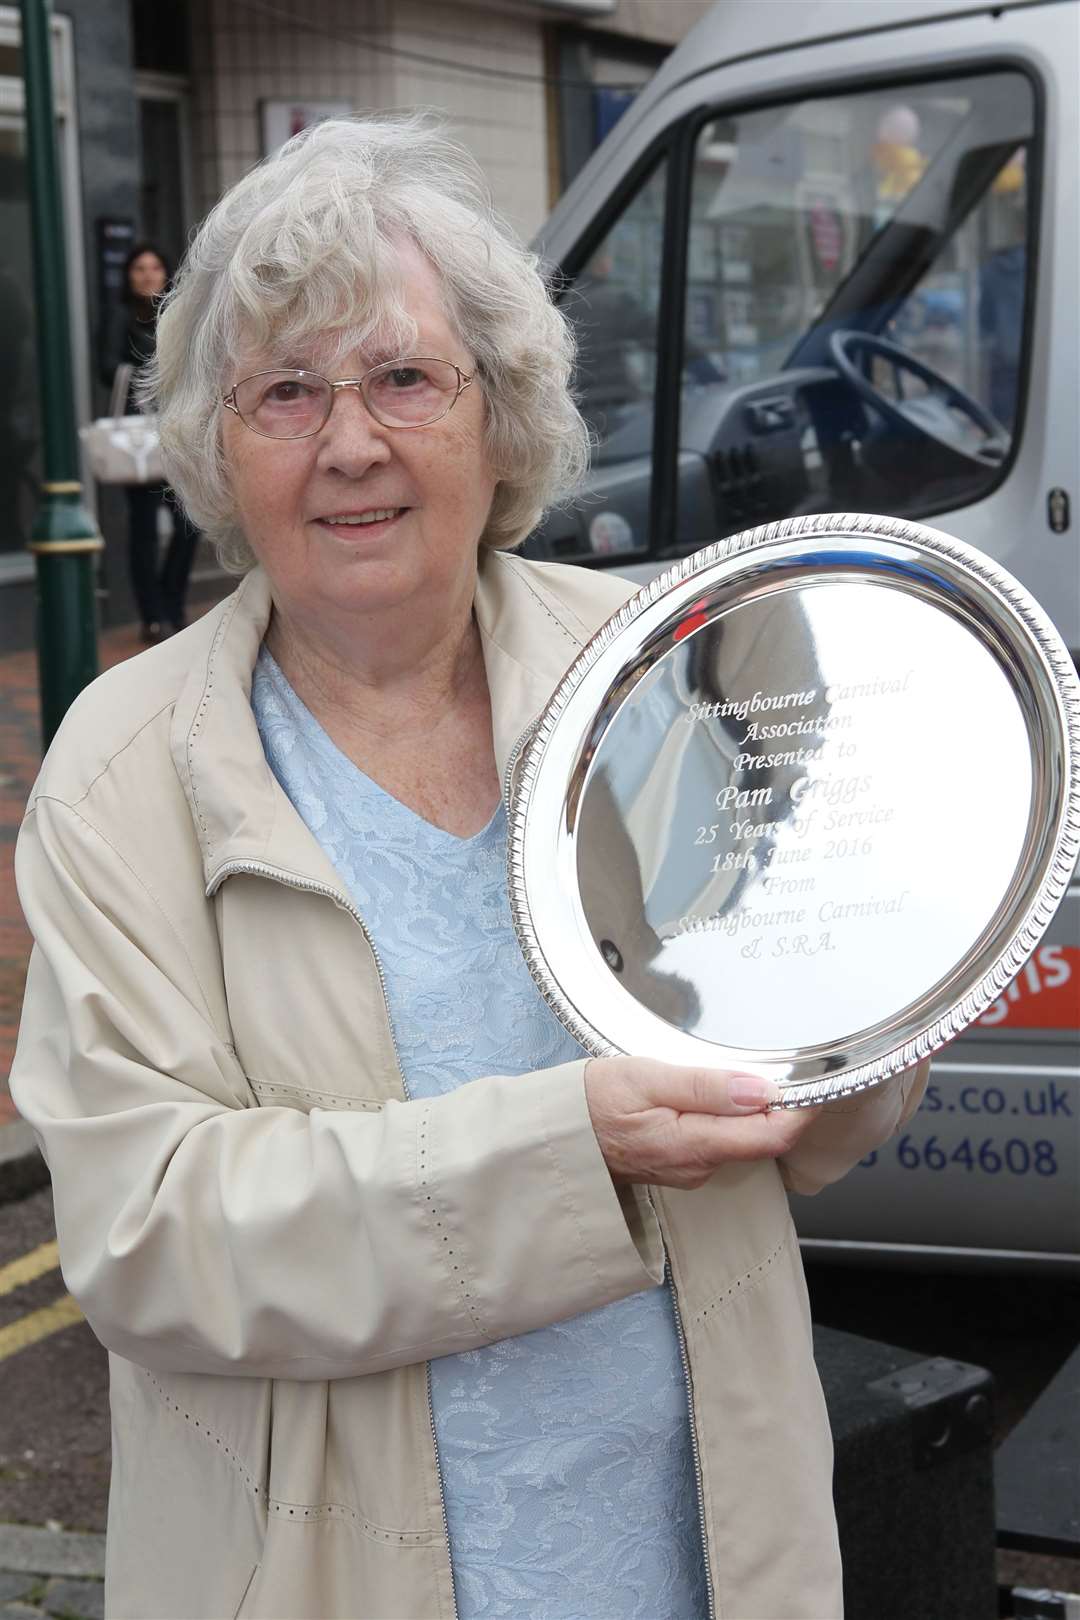 Pam Griggs with a shield to mark serving 25 years of chairing the Sittingbourne Carnival Association. Picture: John Westhrop